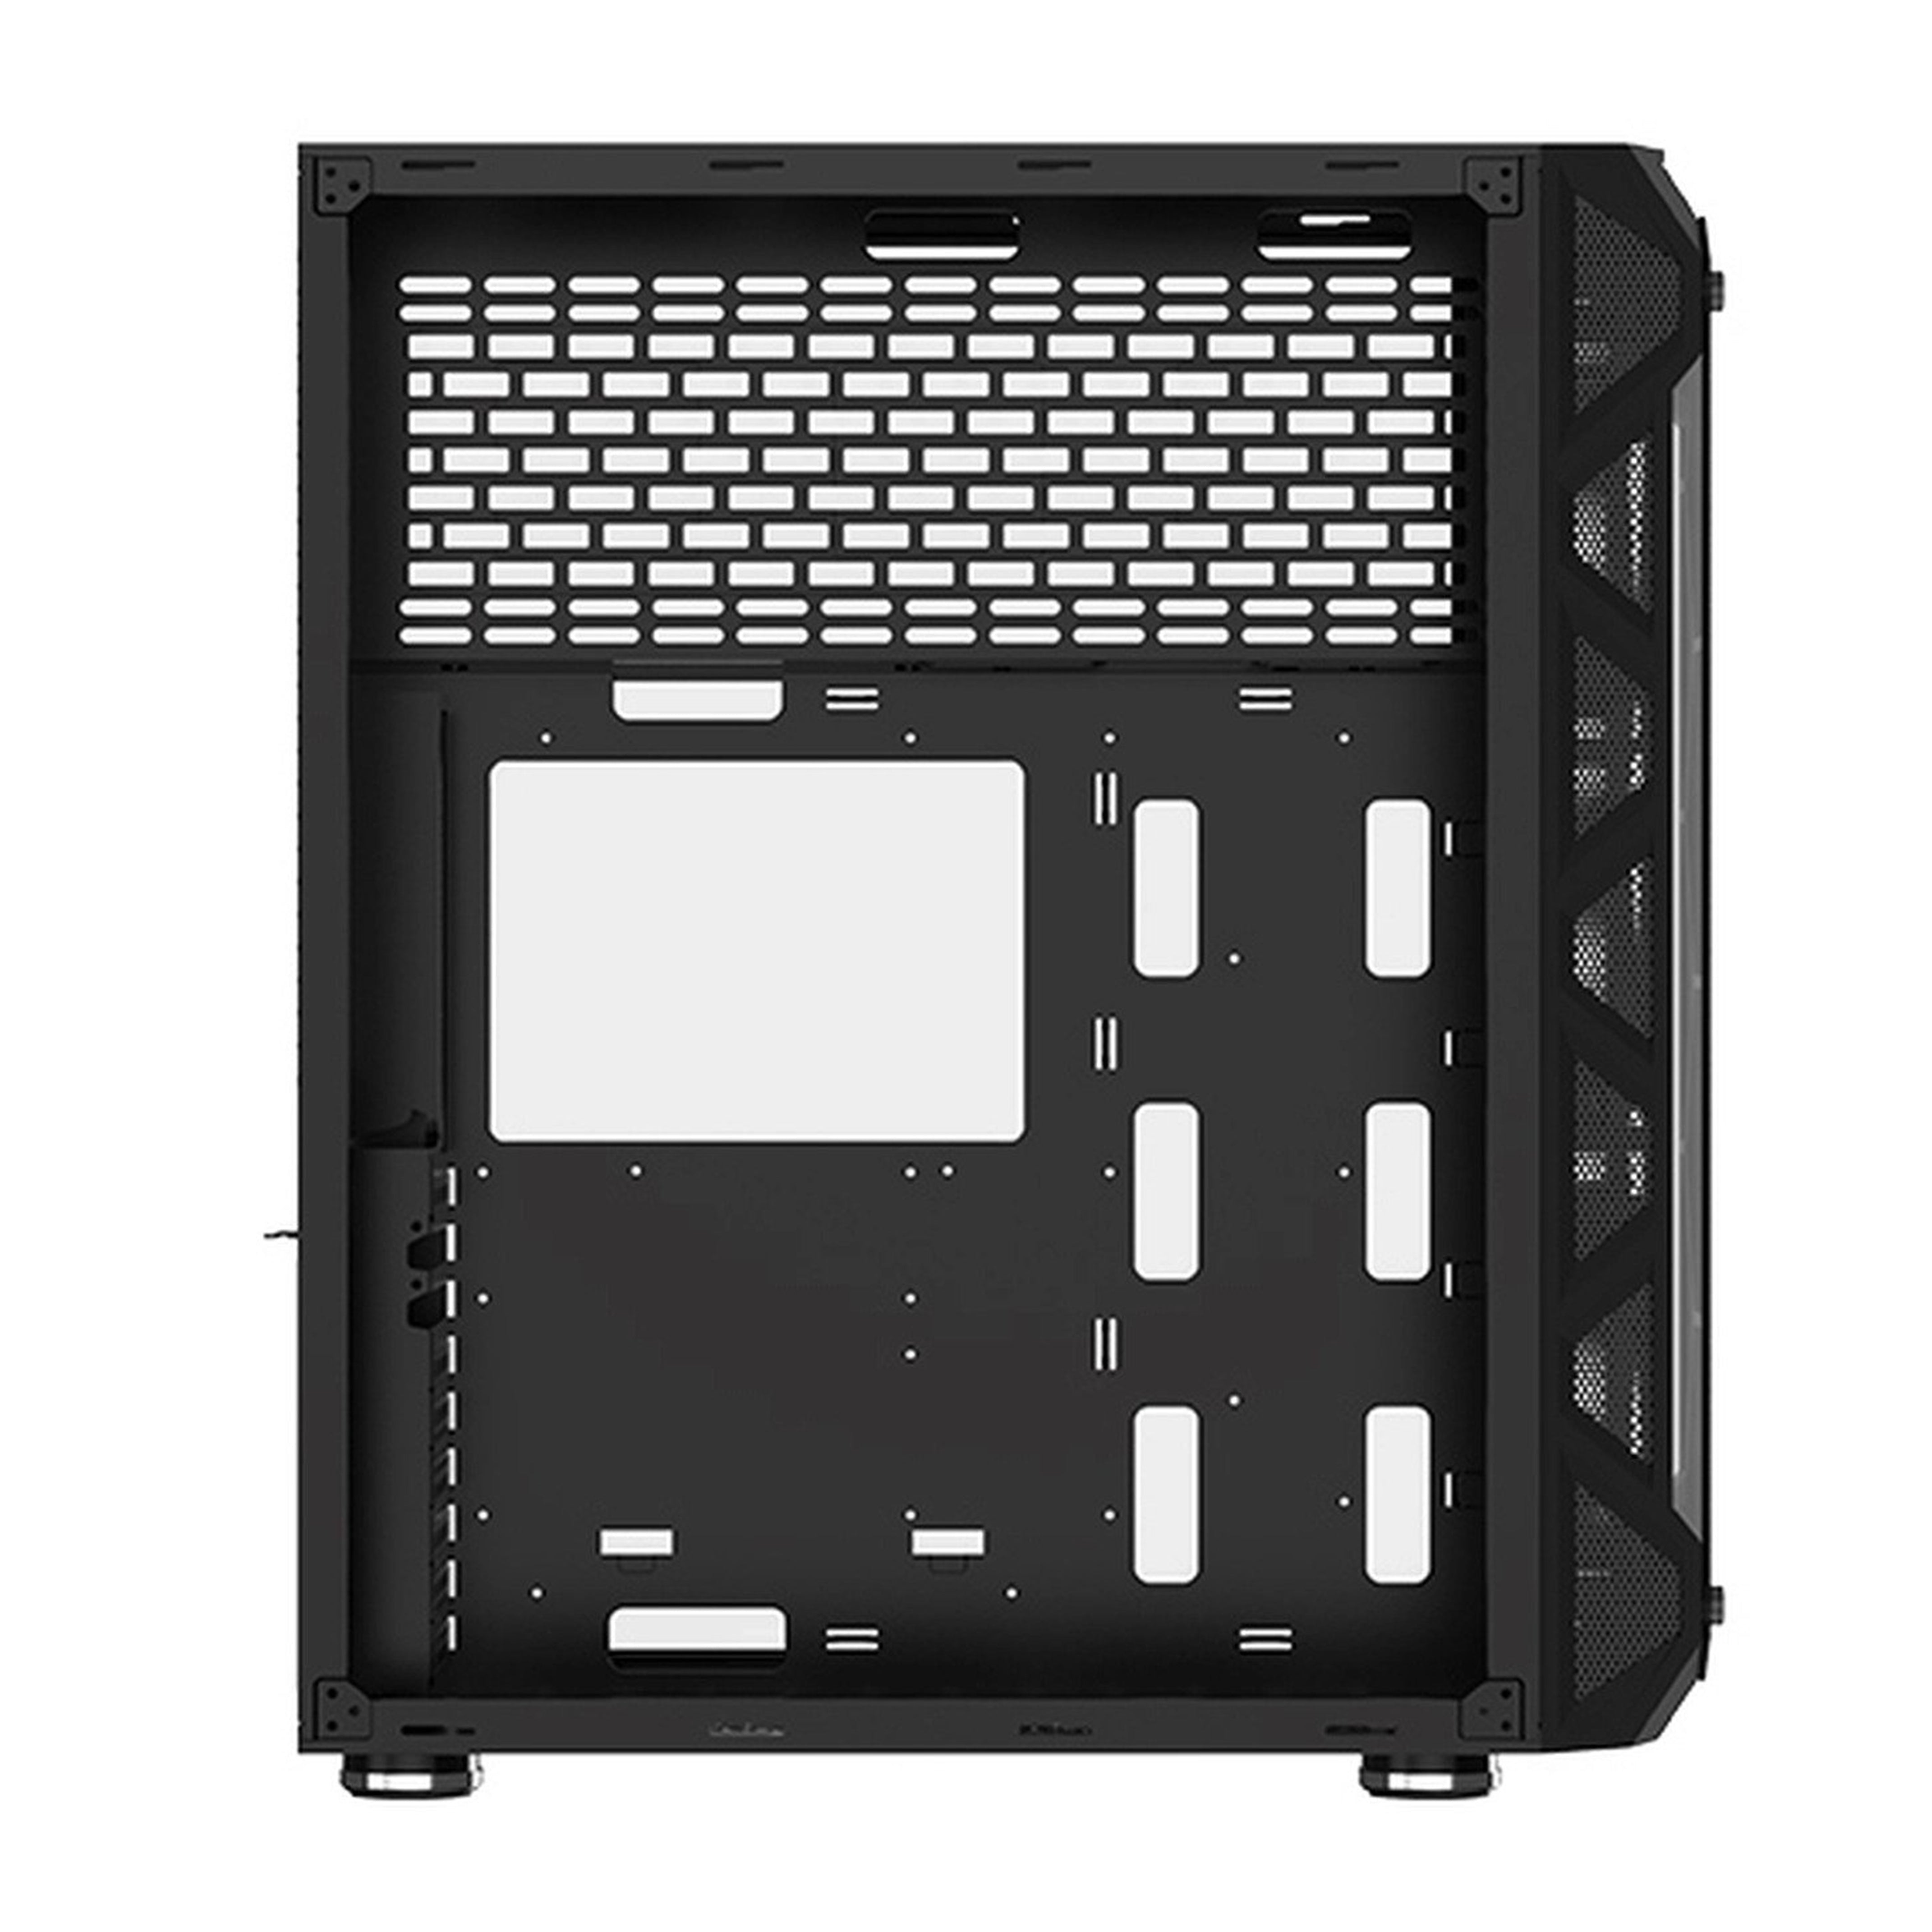 Xigmatek E-ATX Overtake RGB Large Tower Case With Glass Panels Black EN43477, 29904664002812, Available at 961Souq